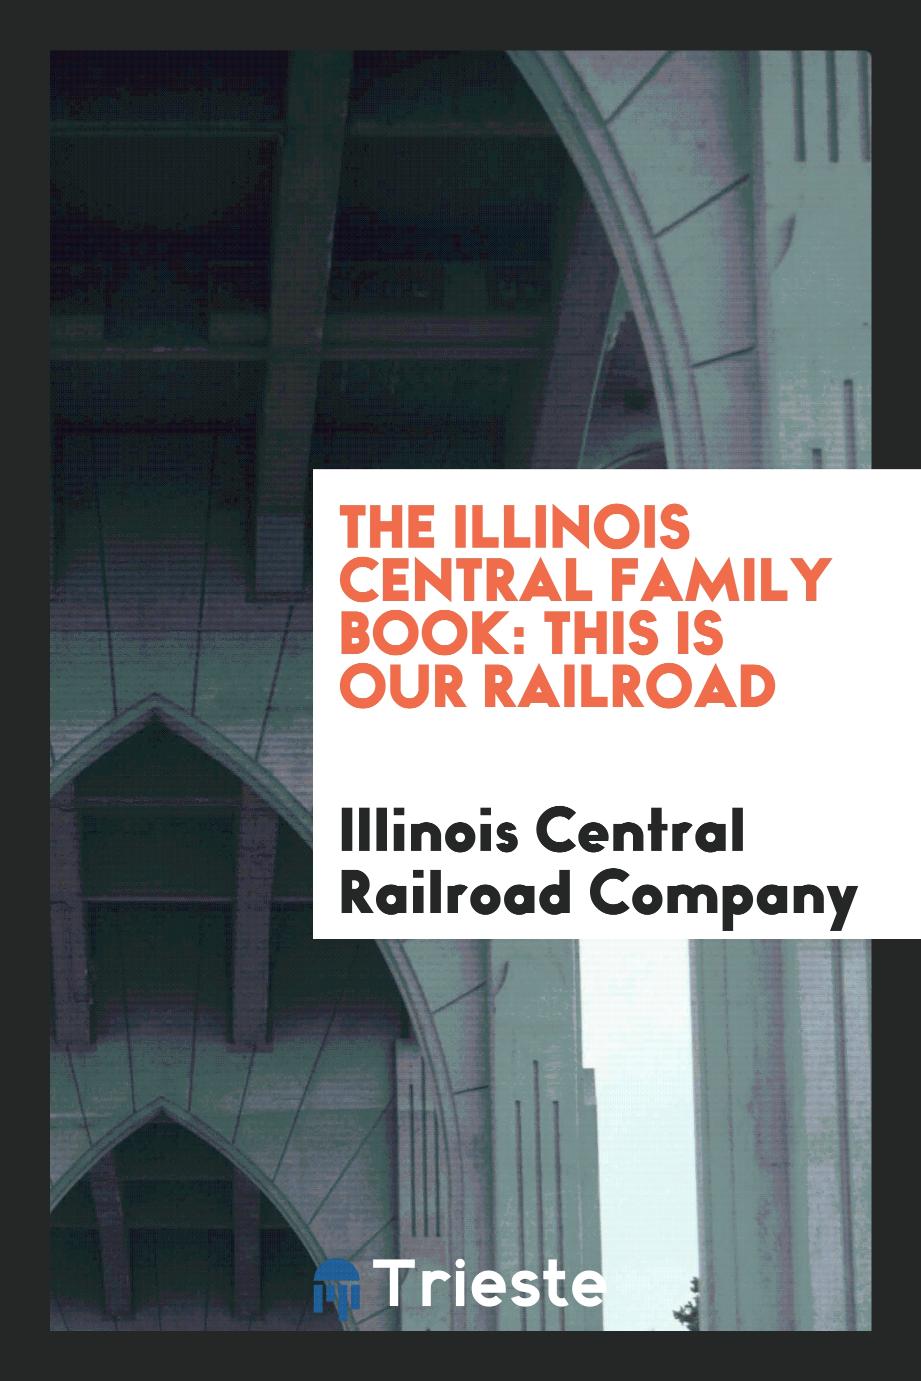 The Illinois Central Family Book: This is Our Railroad